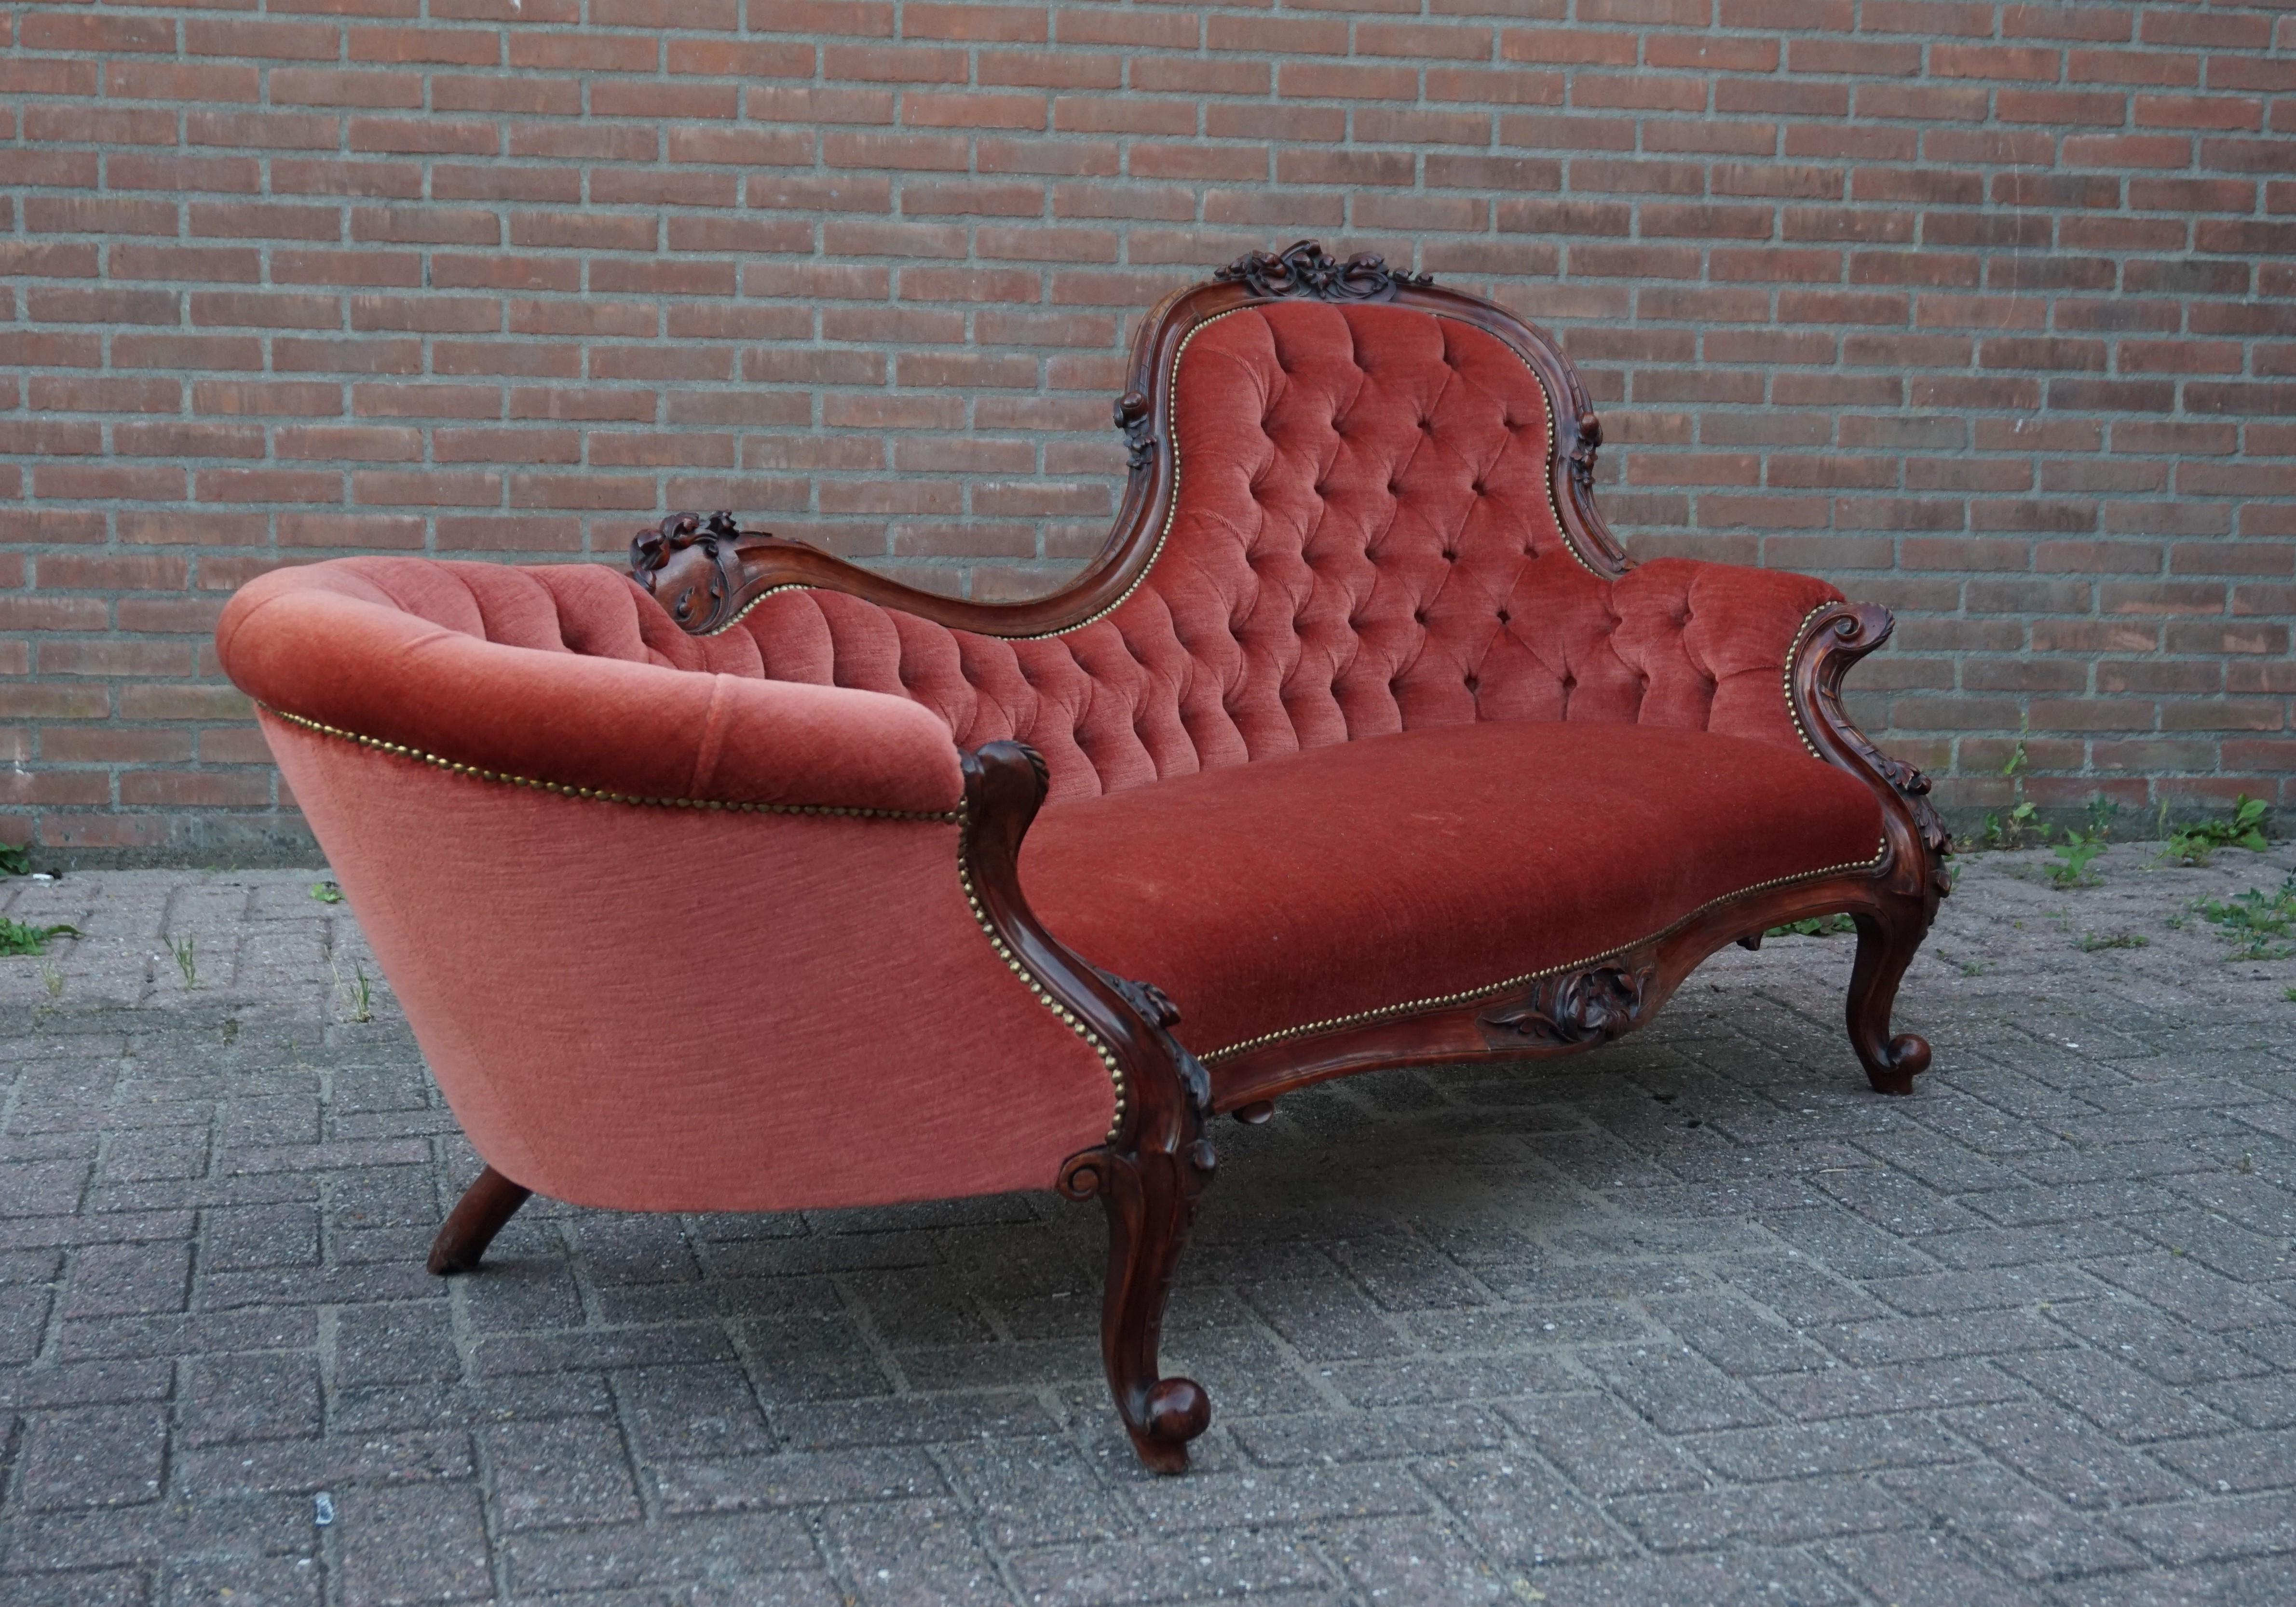 Hand-Carved Stunning Design and Excellent Condition Antique Chaise Longue / Relaxing Chair